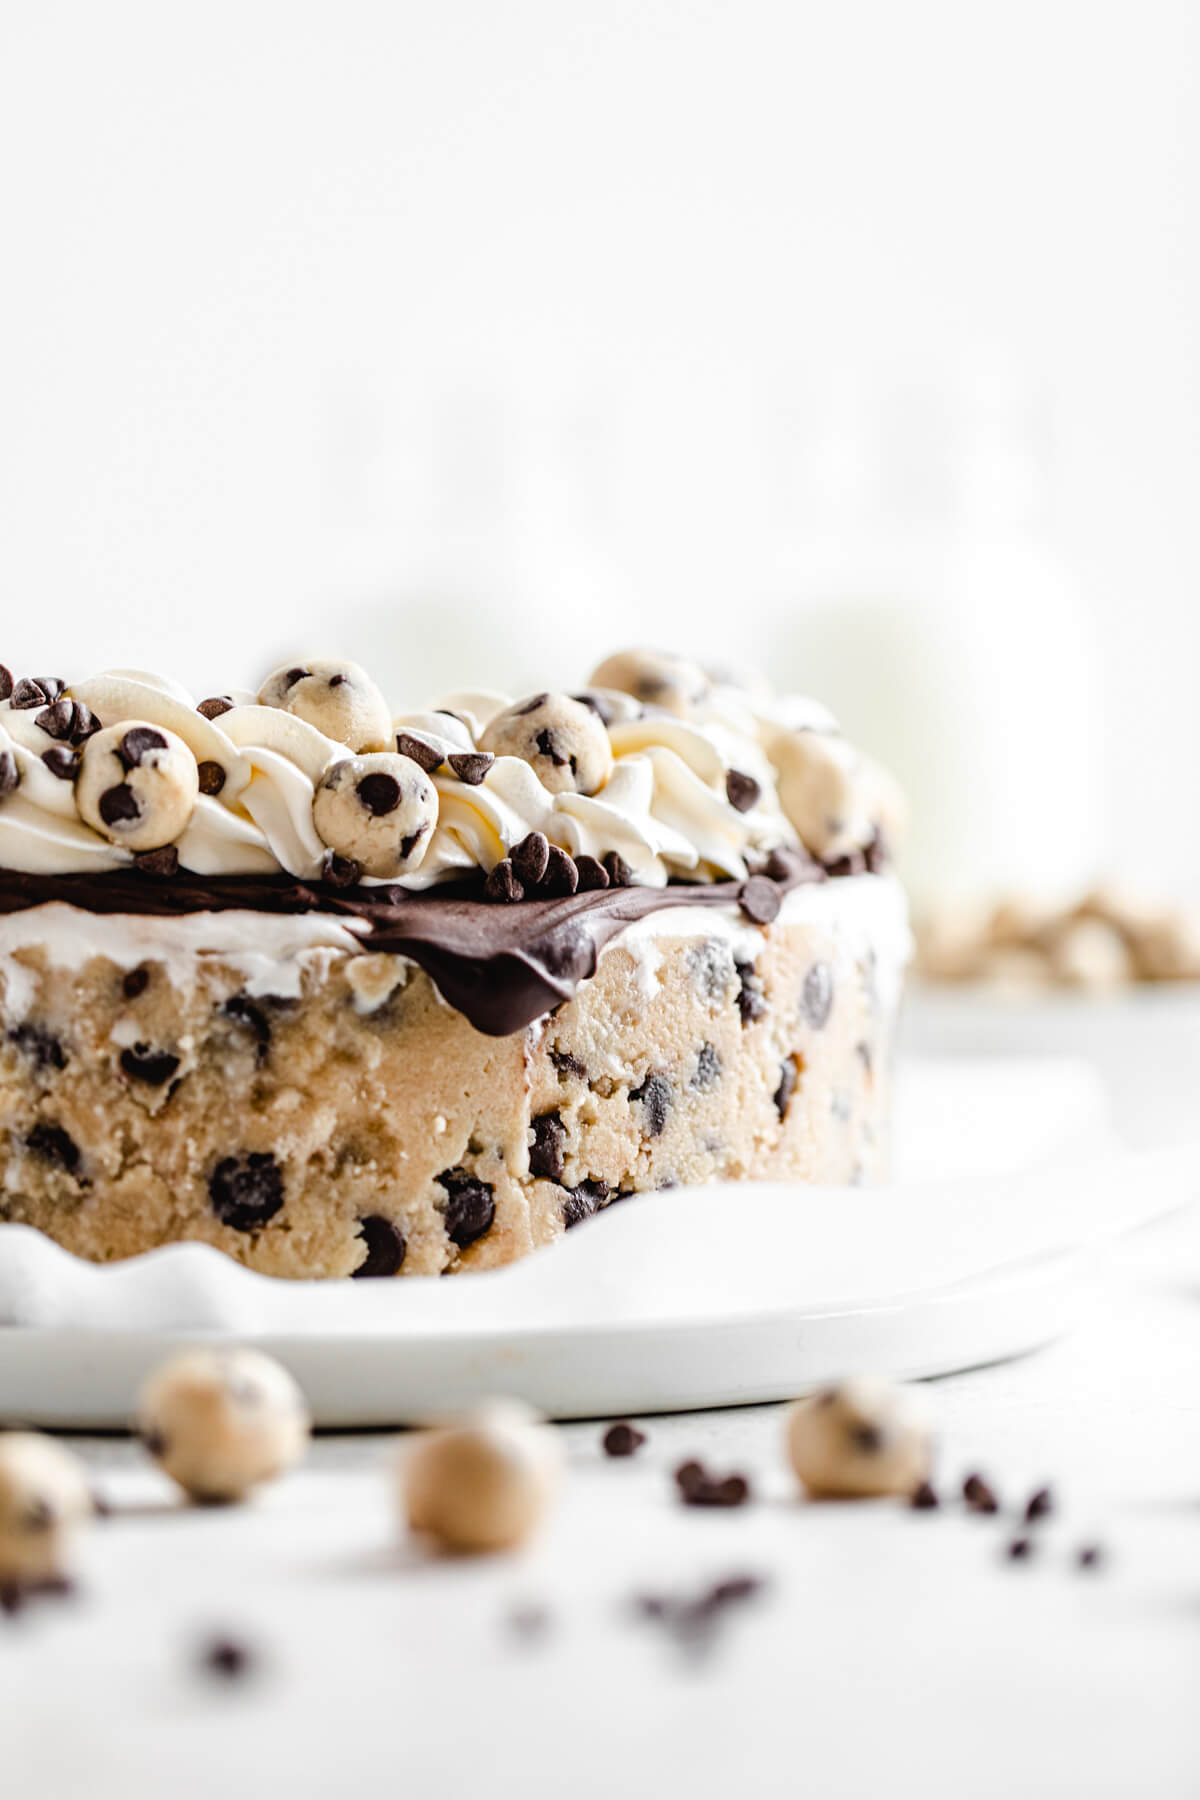 Cookie Dough Ice Cream Cake - Spaceships and Laser Beams